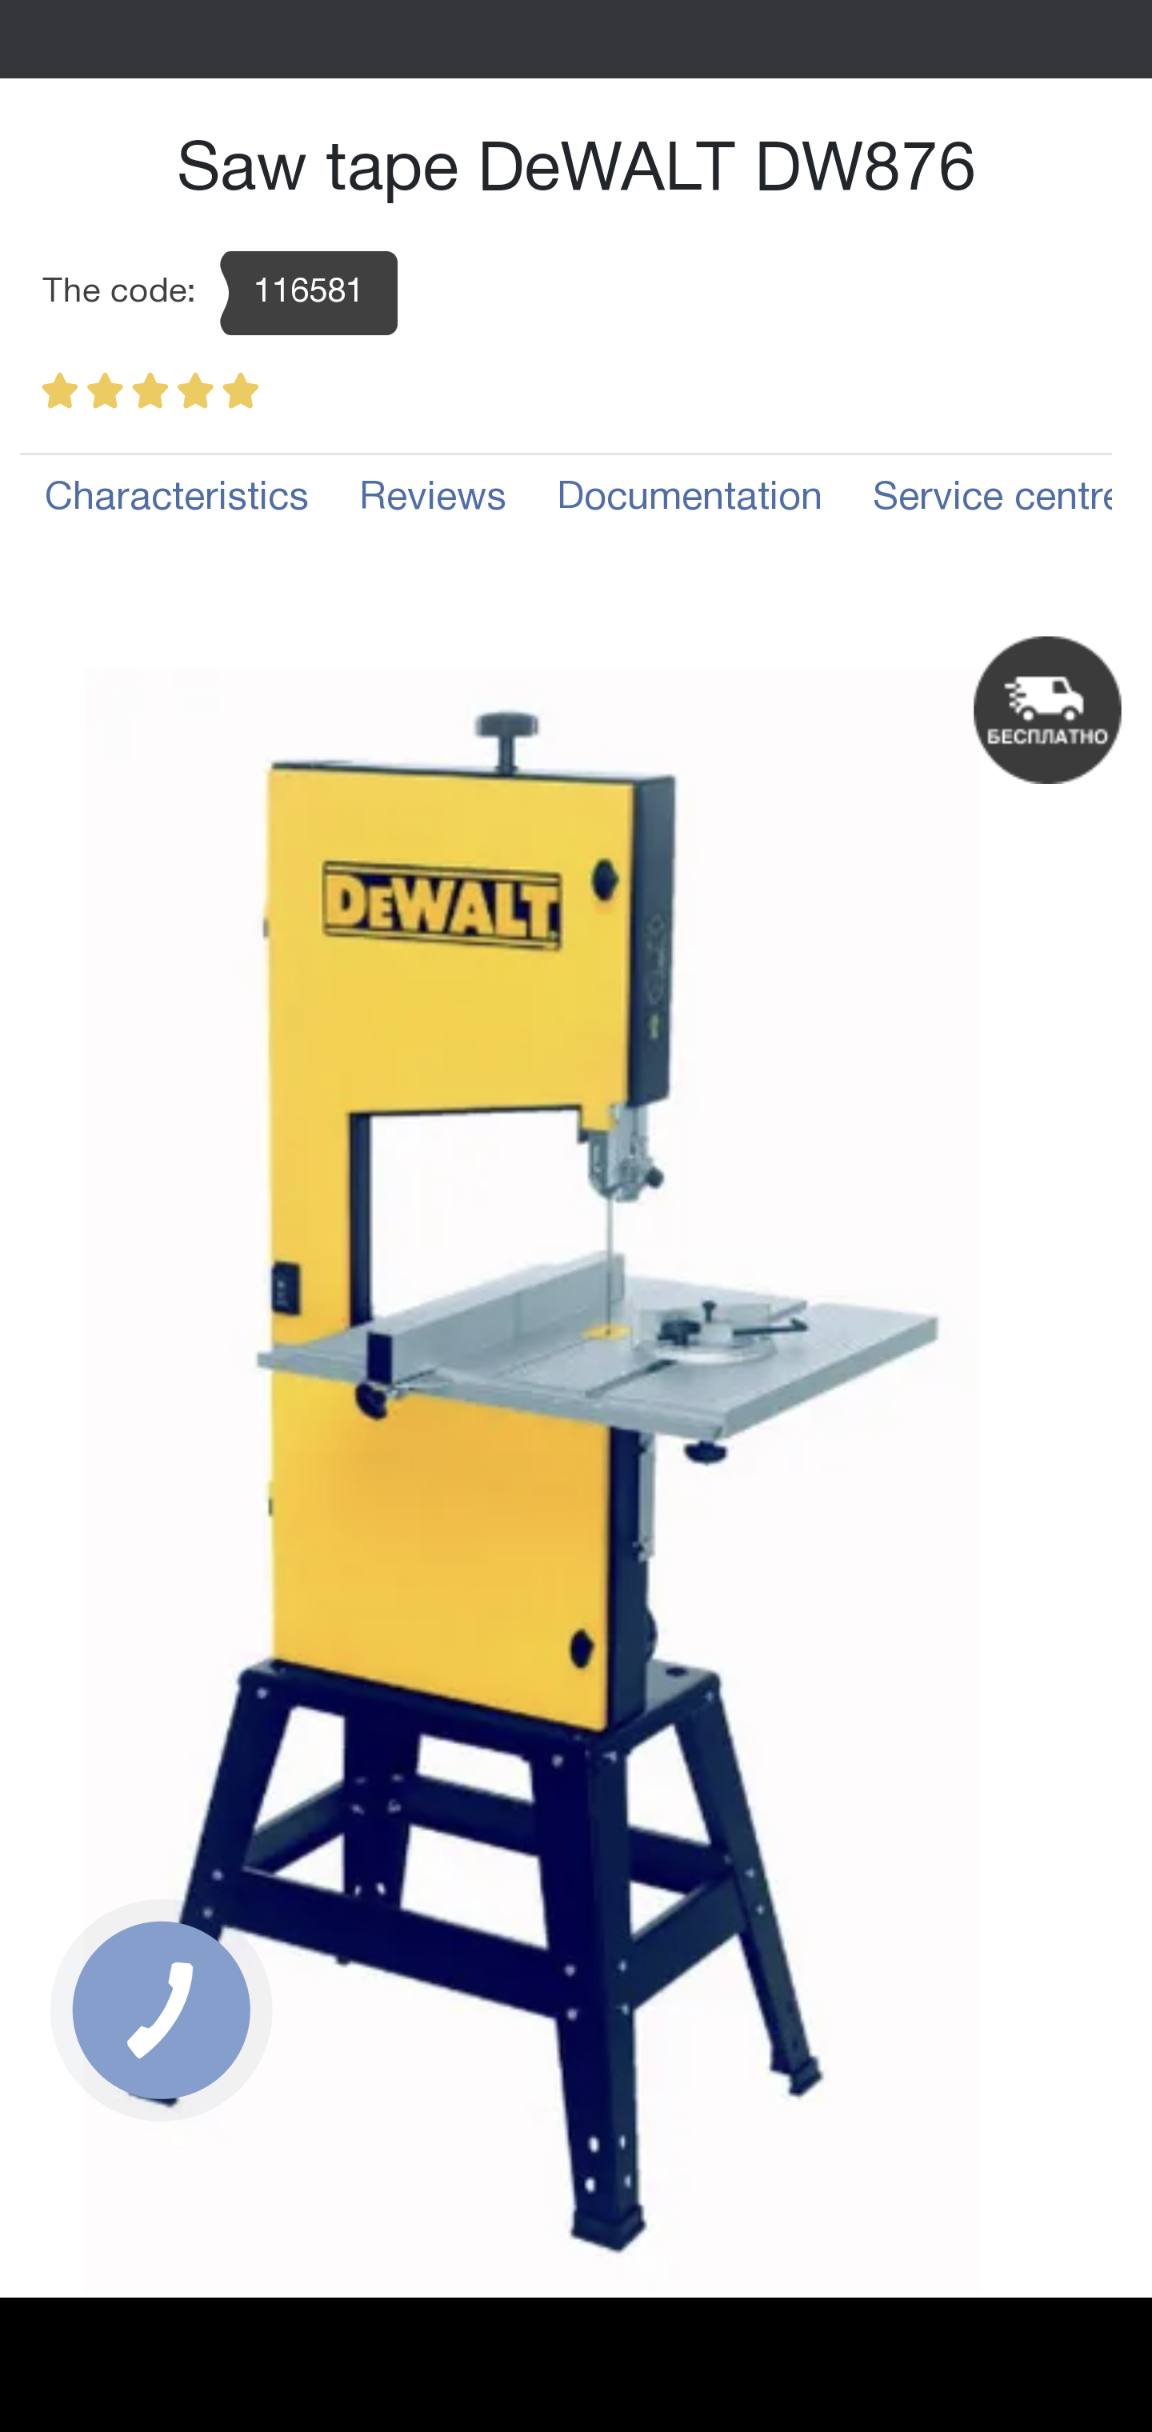 Wijzigingen van Onbevreesd Gang I found this Dewalt full size Band Saw on a Russian website. It seems  legit. Why can't we have this in the US?  https://storgom.ua/product/pila-lentochnaia-dewalt-dw876.html | Scrolller